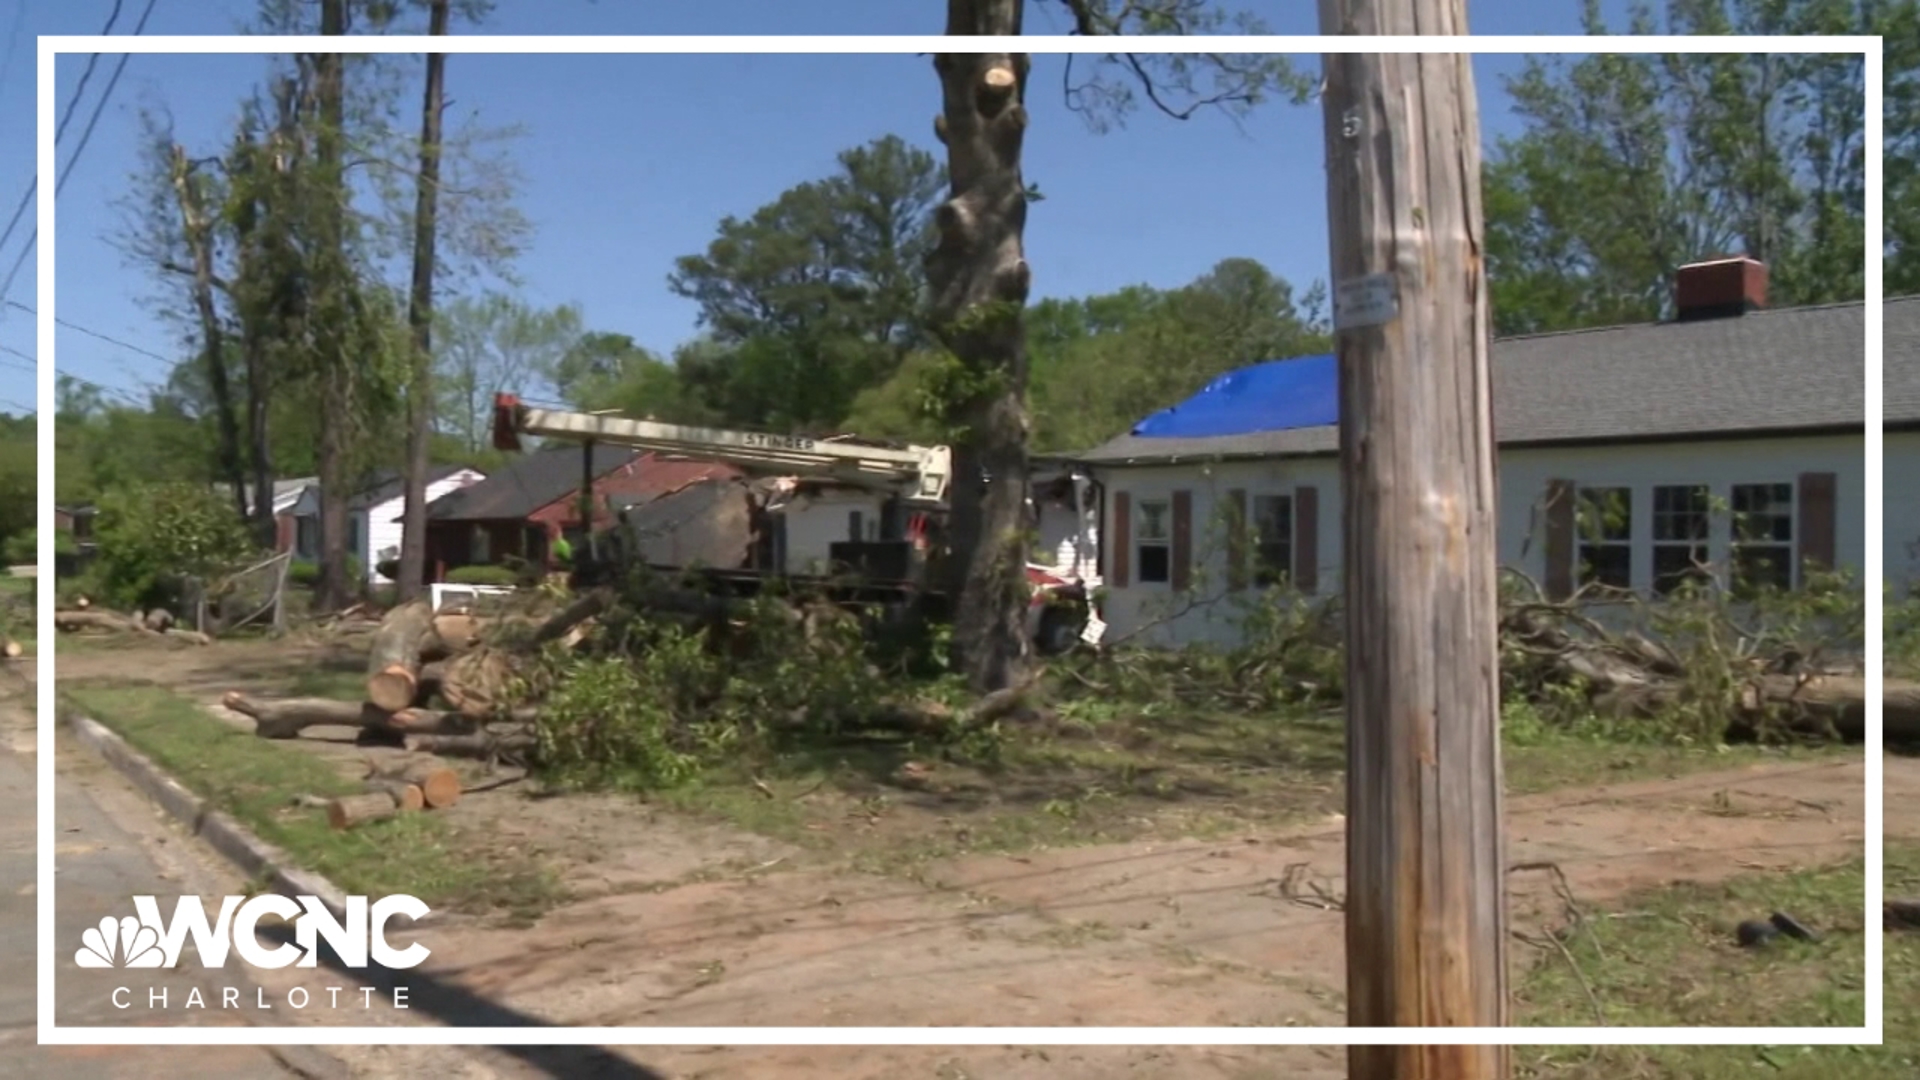 More than two months after hailstorms tore through Rock Hill, some residents are still struggling. Now, help is finally on the way.